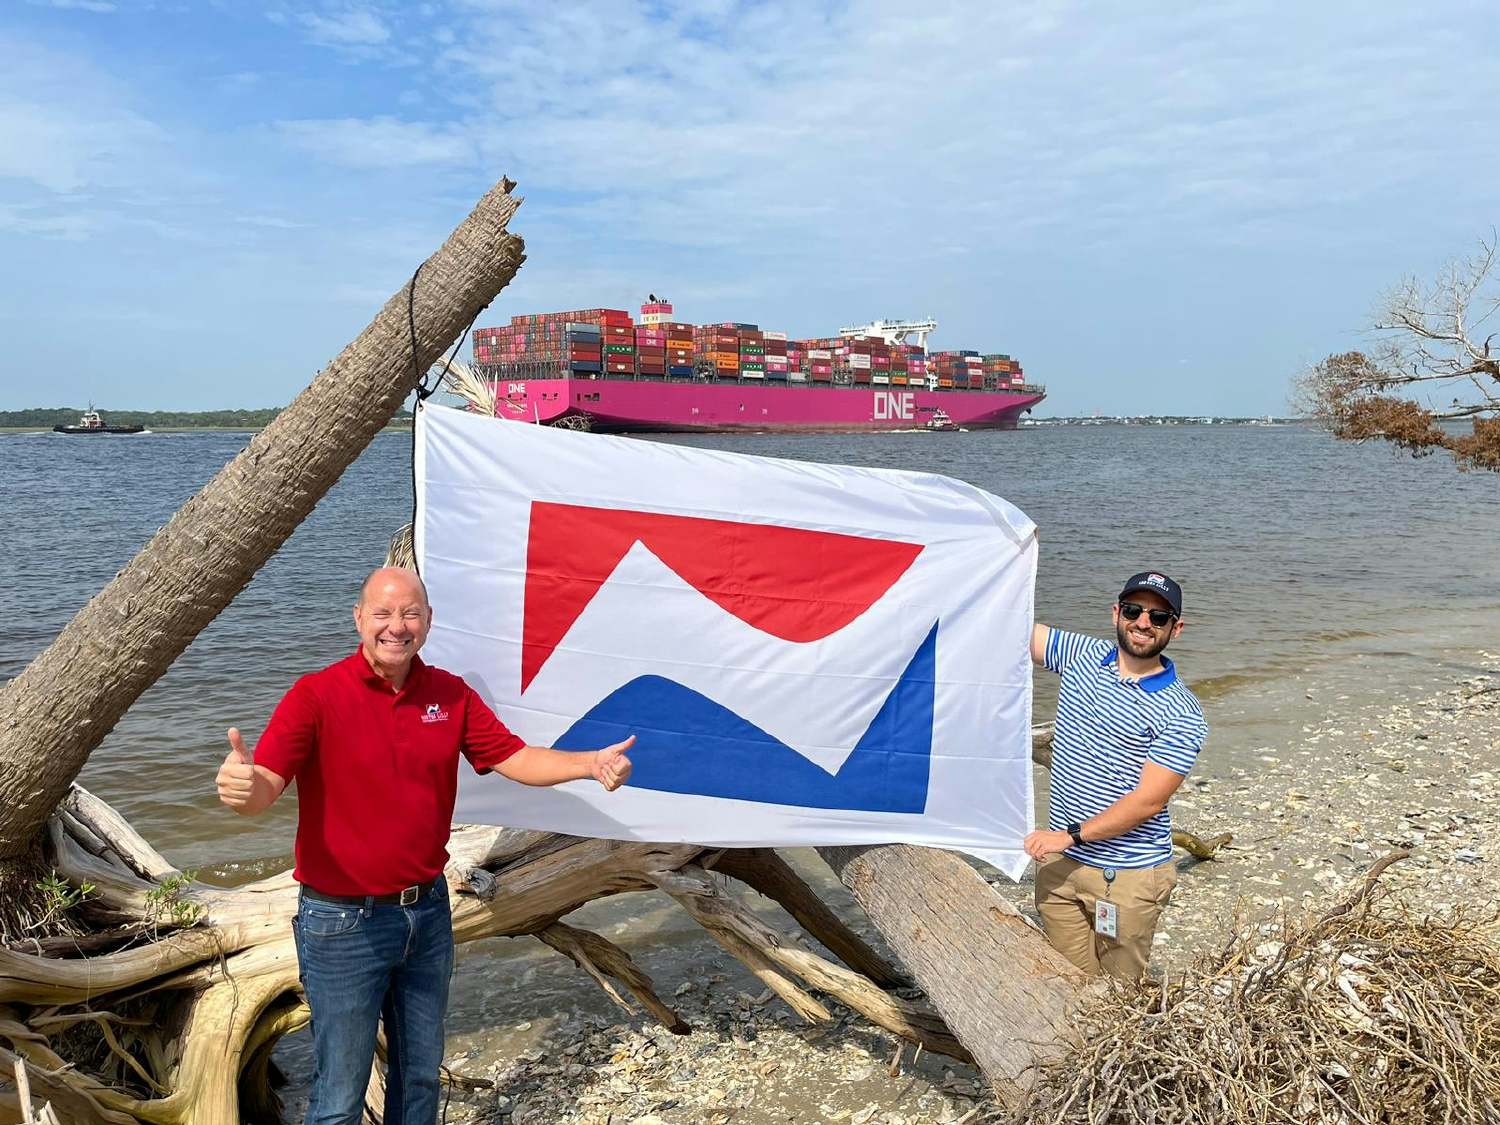 The NLI Jacksonville team welcomed in the ONE-Stork vessel by flying the NLI flag. 